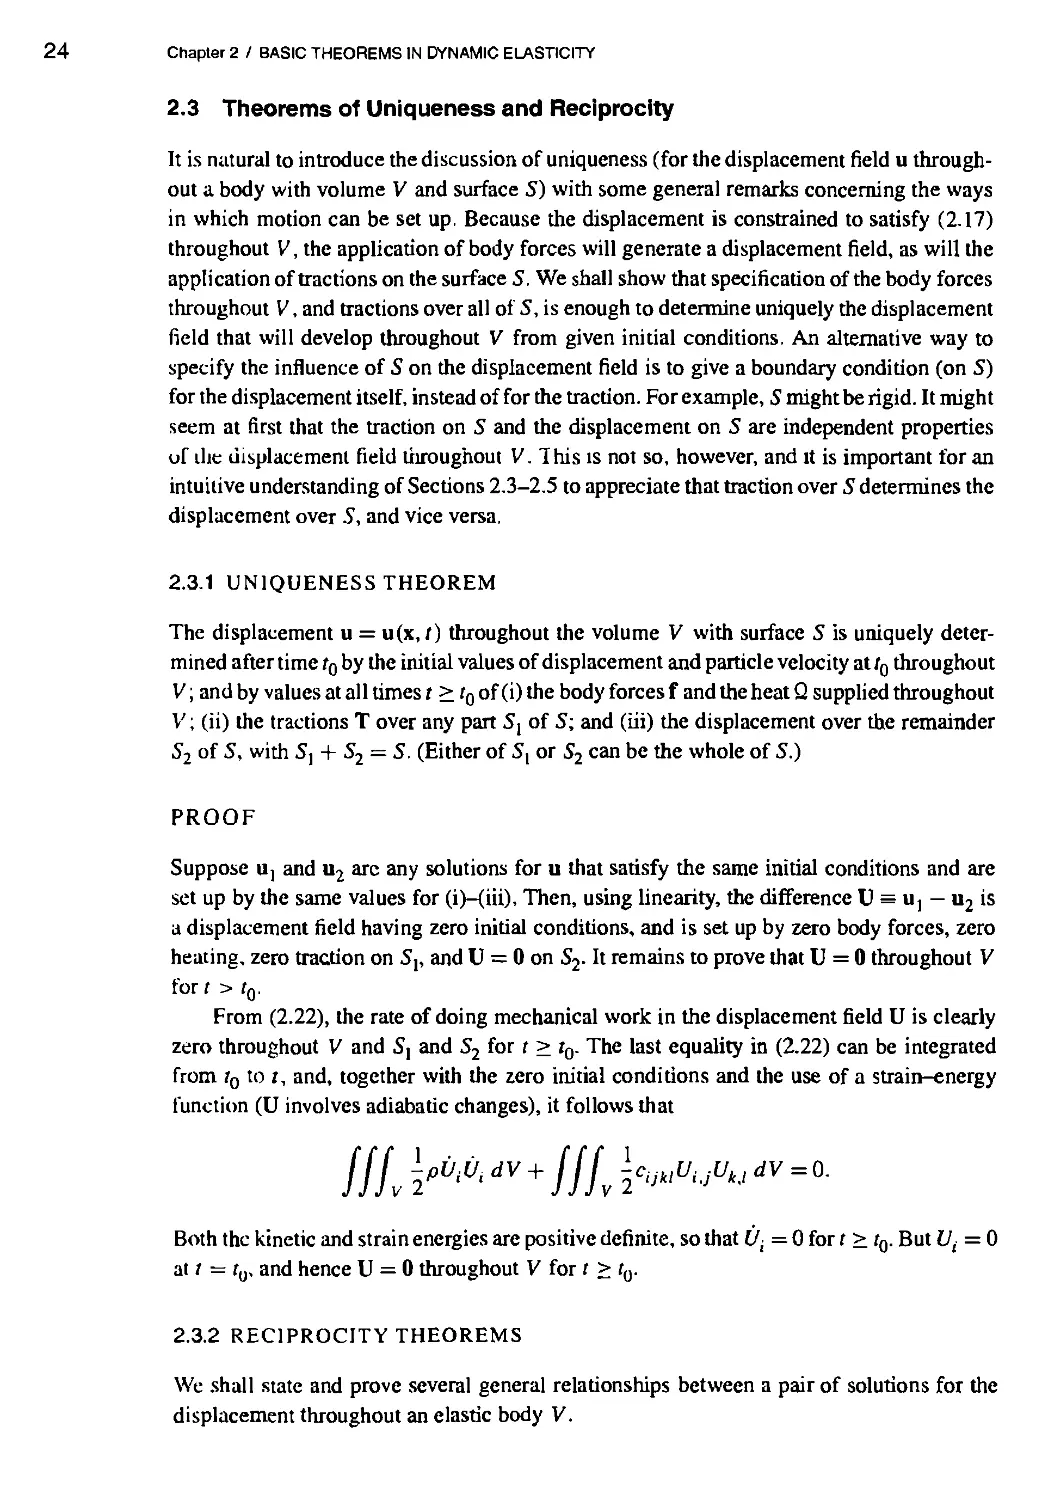 2.3 Theorems of Uniqueness and Reciprocity
2.3.2 Reciprocity theorems